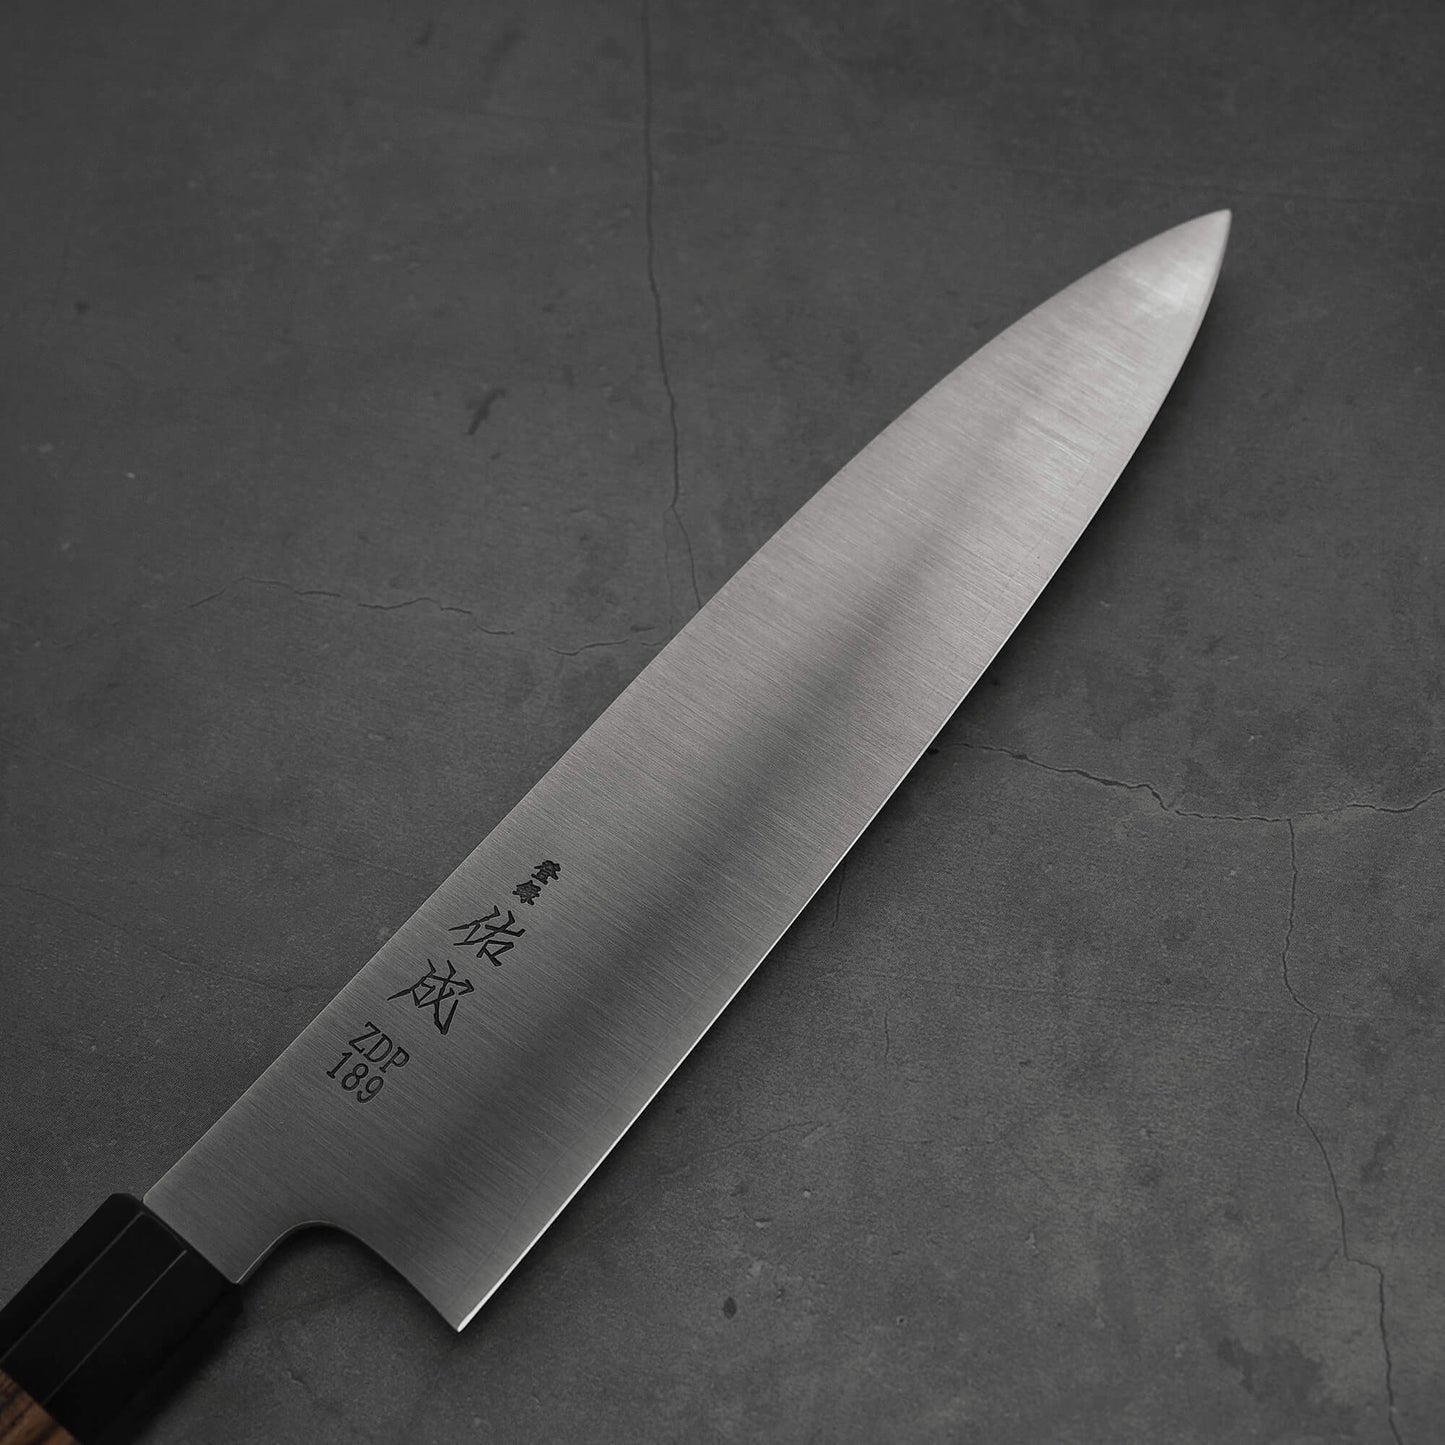 Top view of 240mm Sukenari ZDP189 gyuto knife. Image focuses on the blade only with kanji